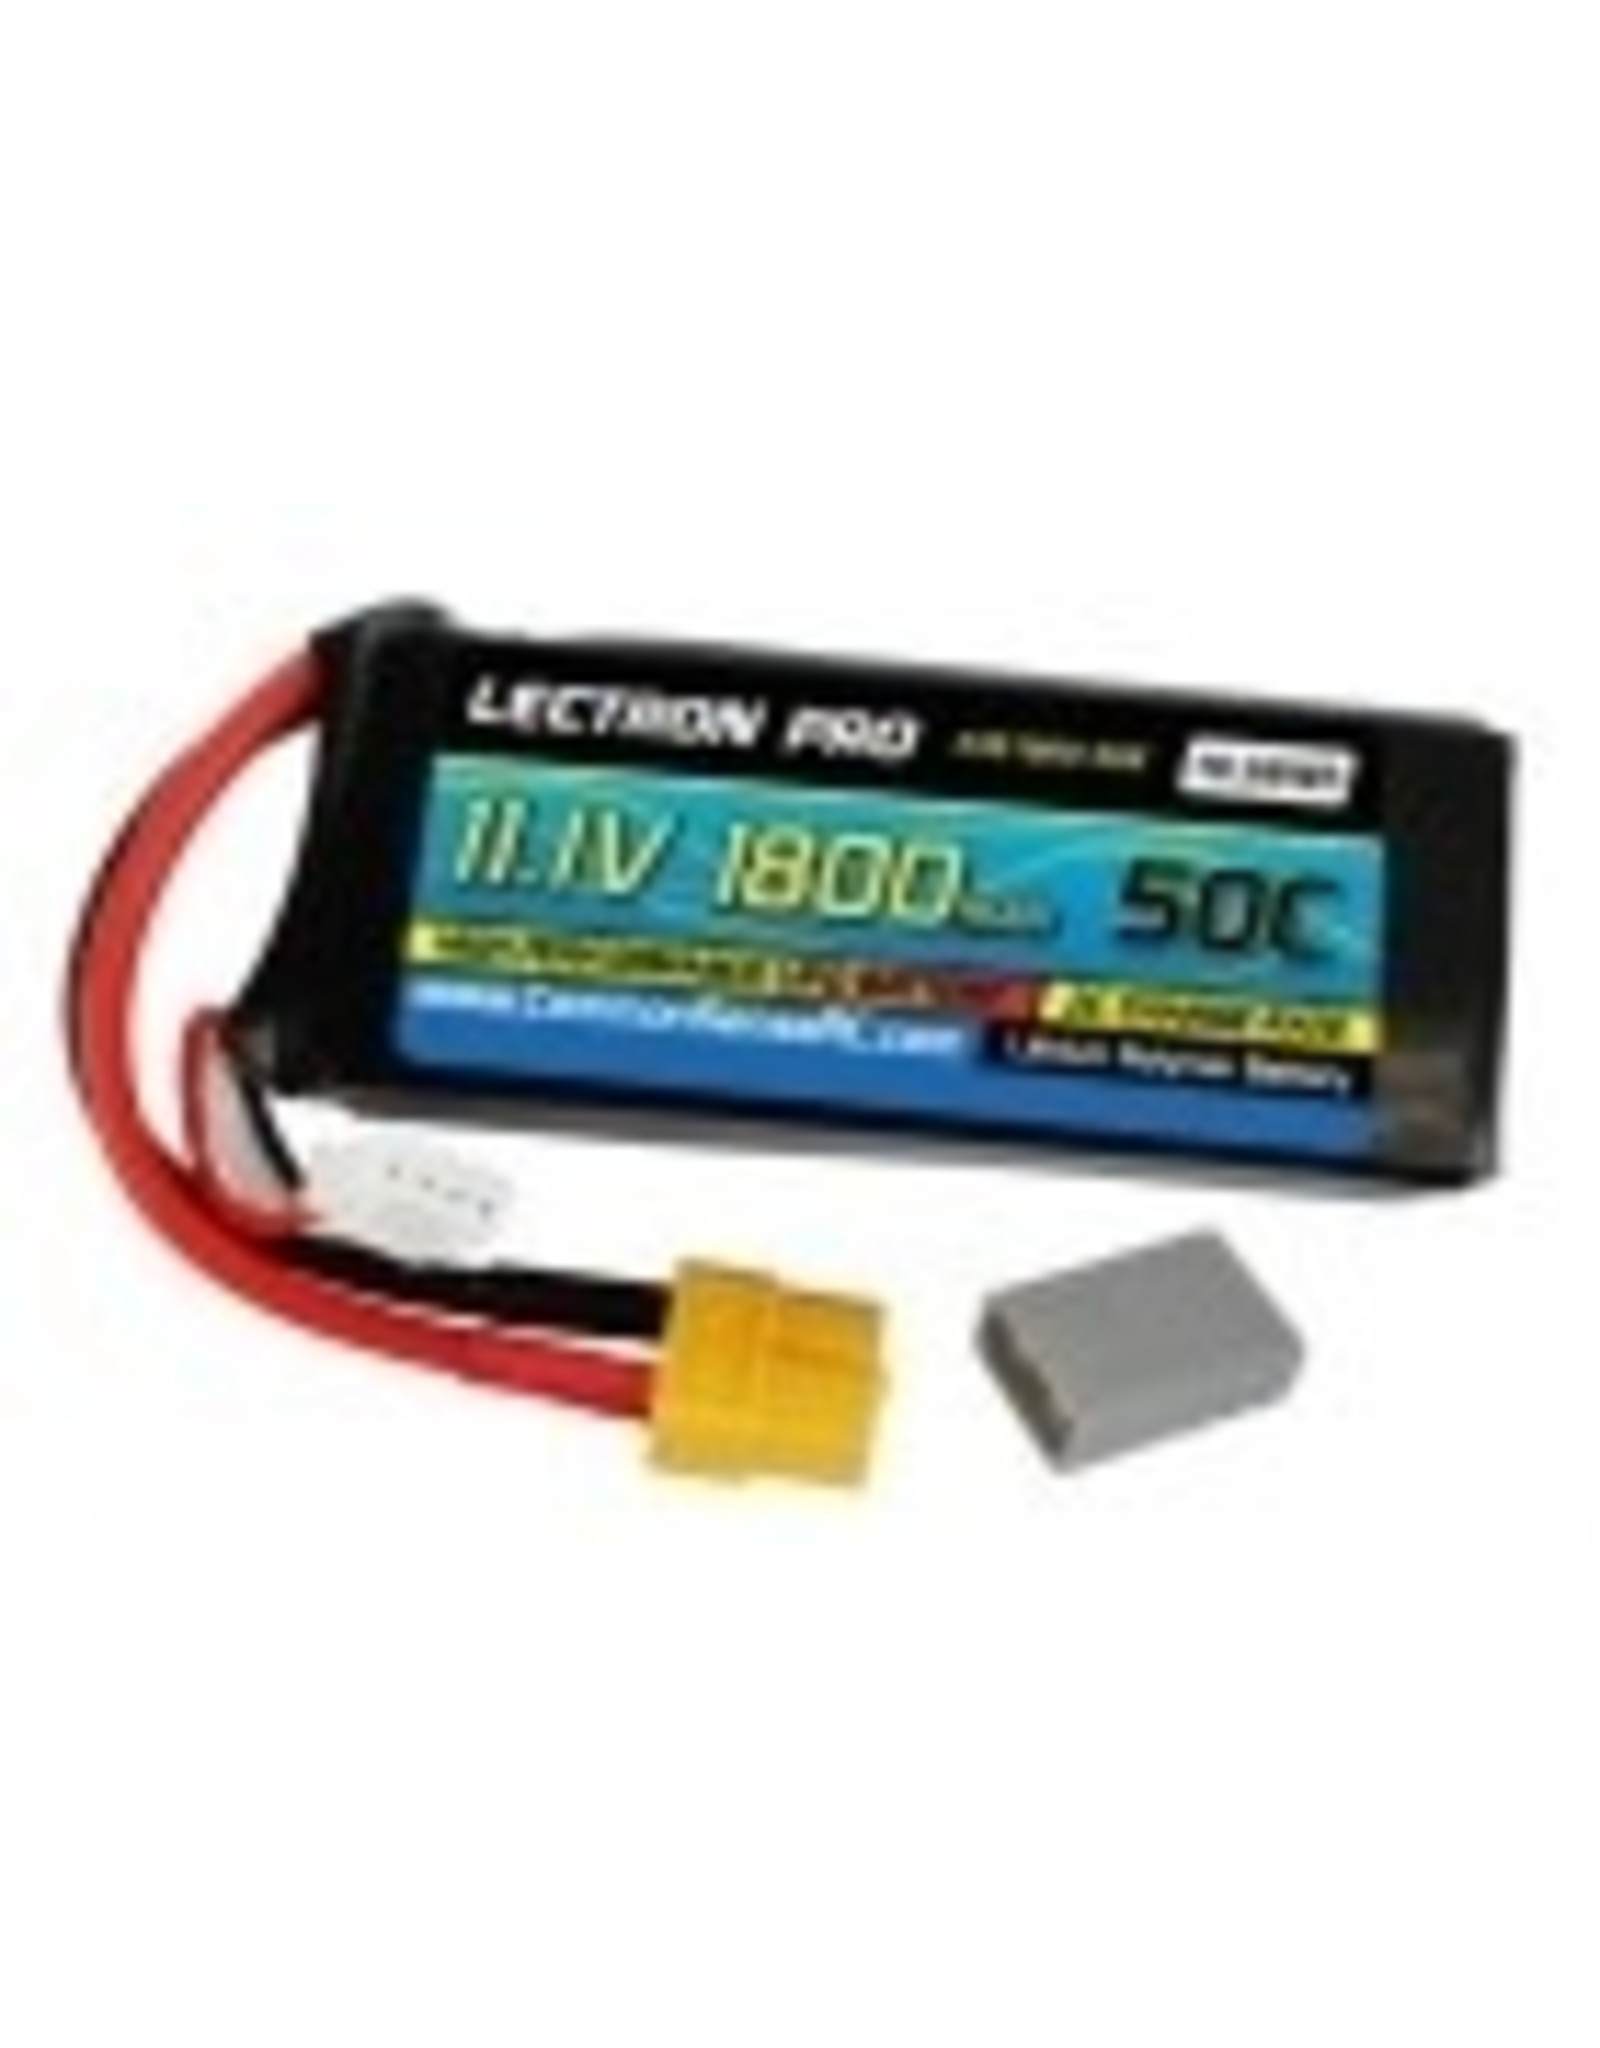 Lectron Pro Lectron Pro 11.1V 1800mAh 50C Lipo Battery with XT60 Connector + CSRC adapter for XT60 batteries to popular RC vehicles